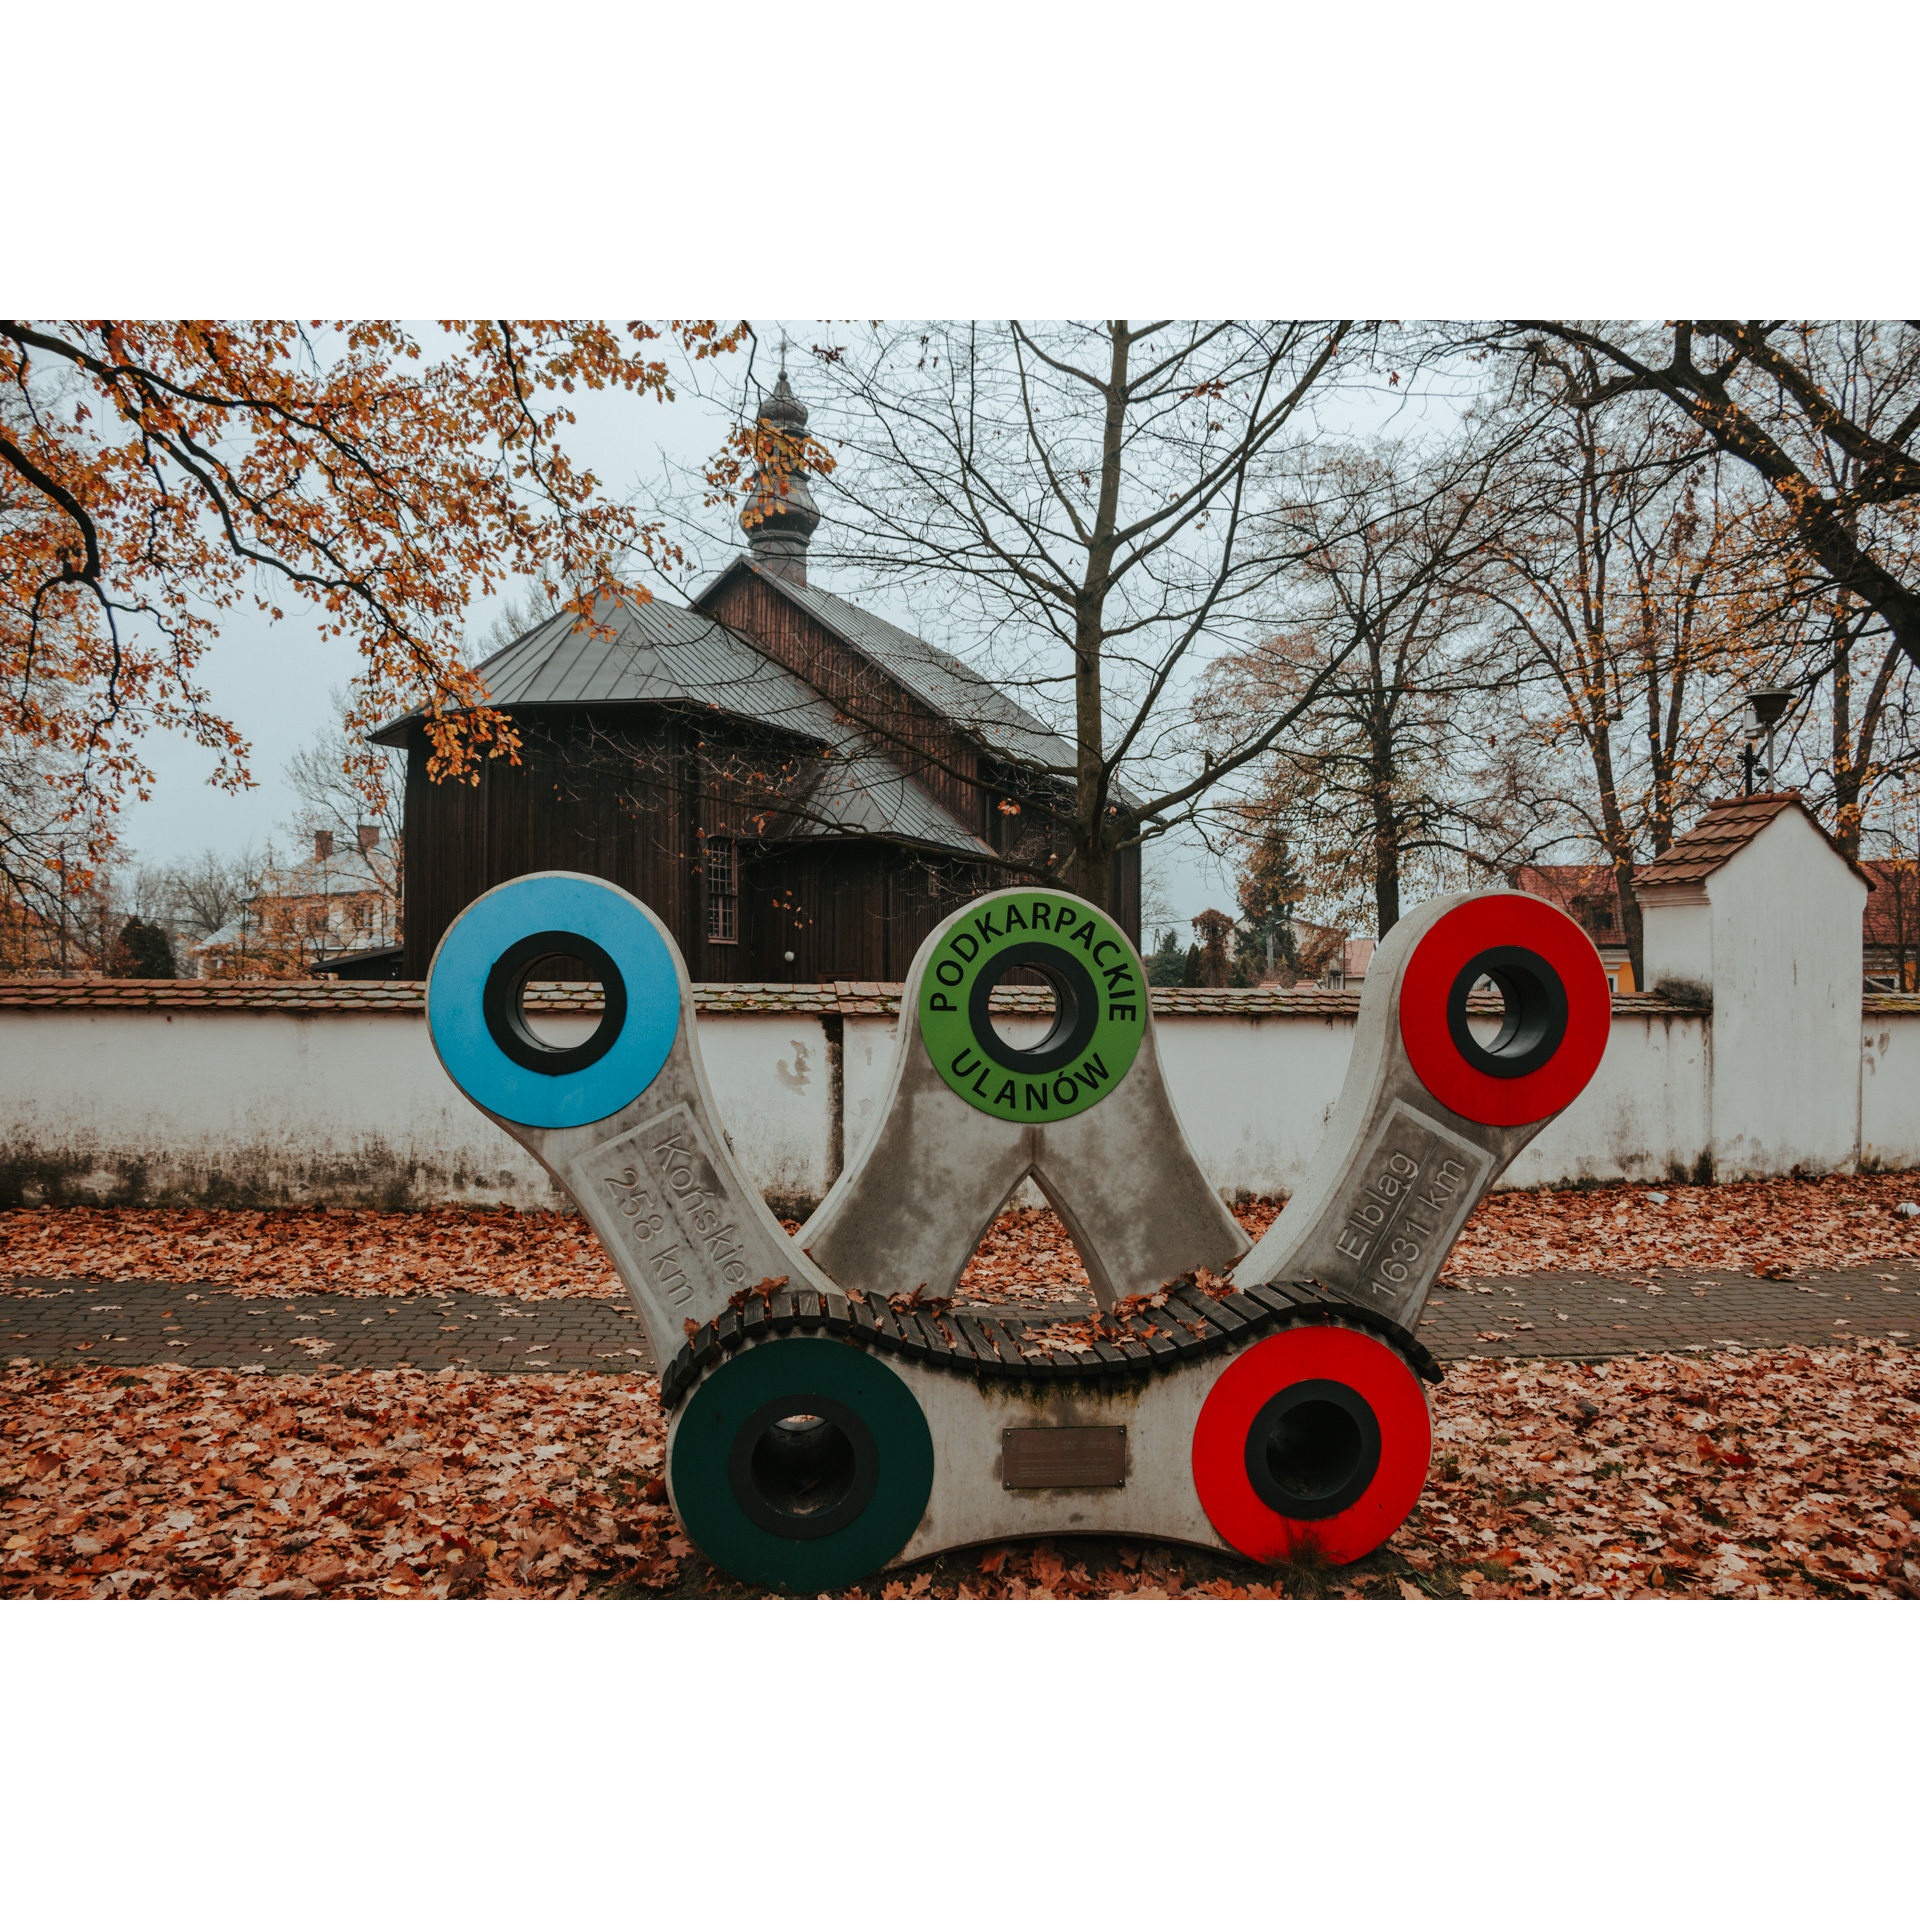 A memorial bench in the shape of a bicycle chain with colorful links, a white wall and a wooden church in the background